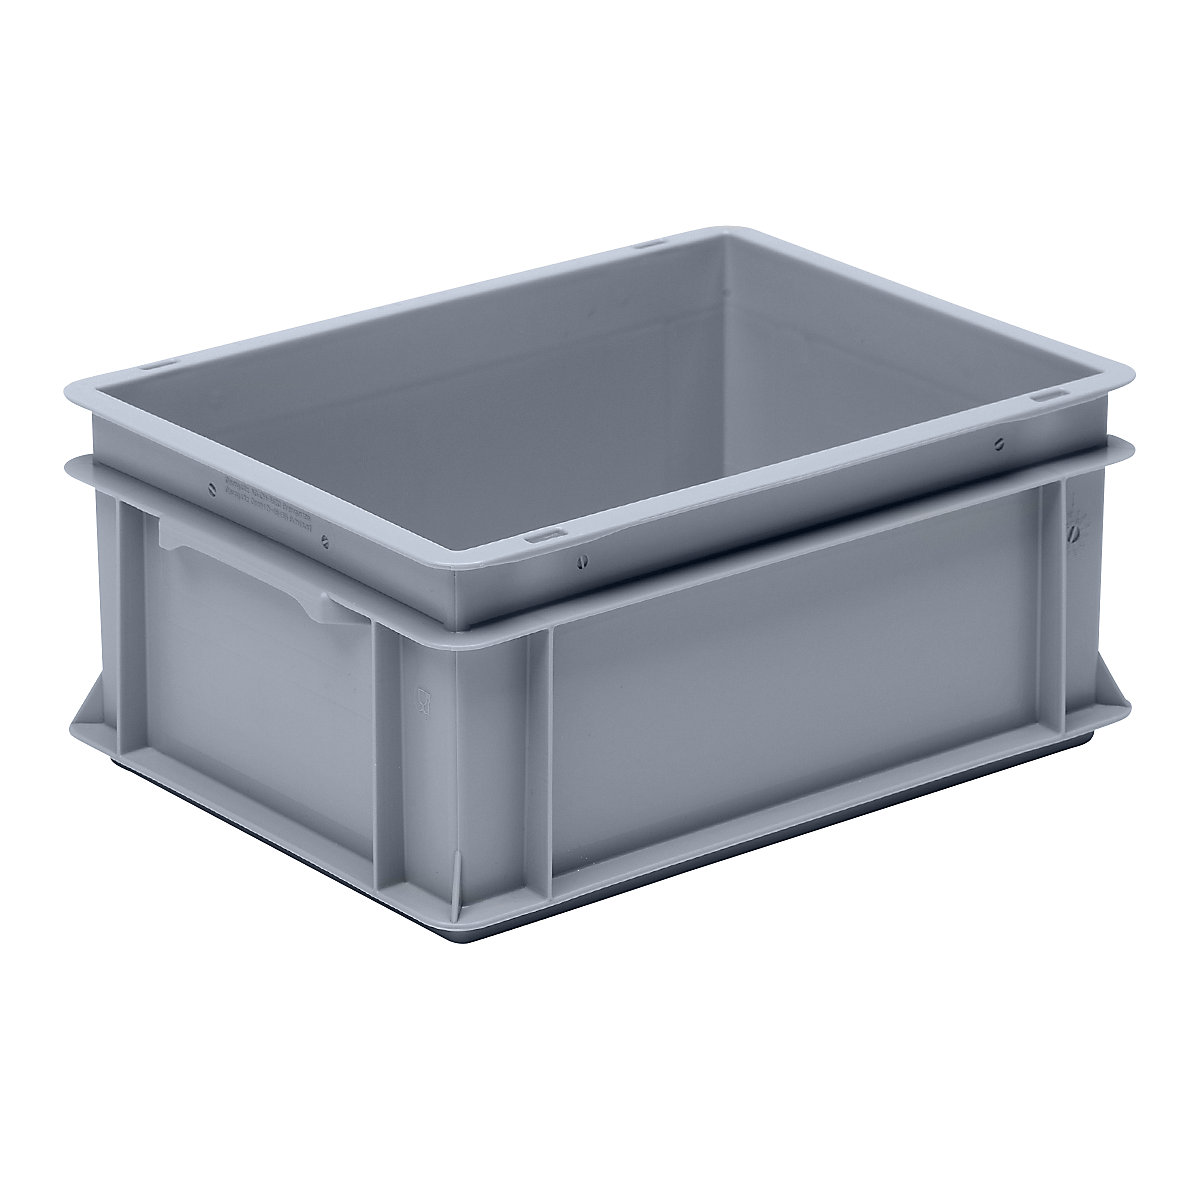 Euro stacking container made of polypropylene (PP), max. load 20 kg, silver grey, capacity 15 l, external height 170 mm, pack of 6